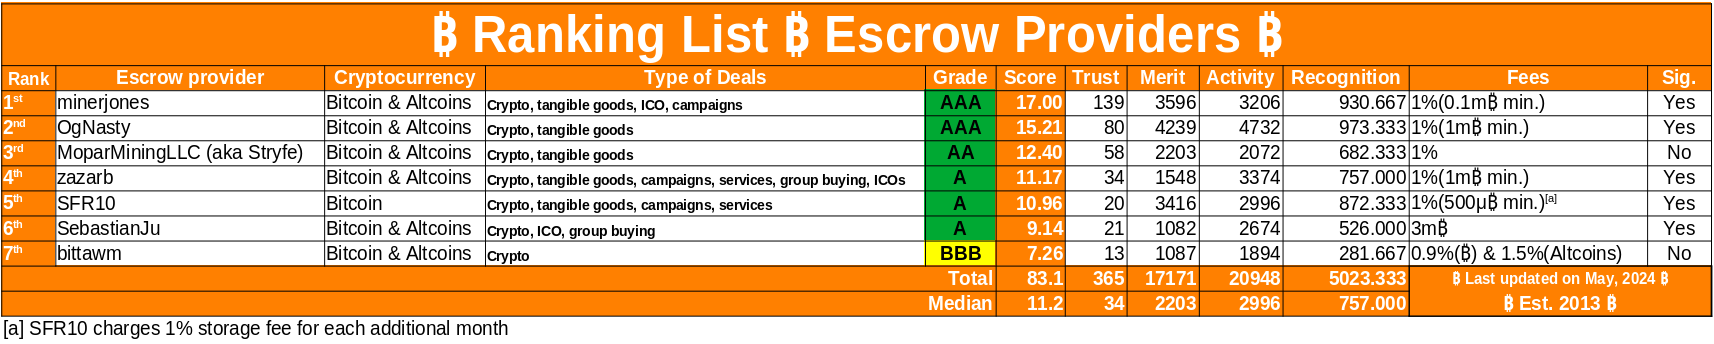 If Ranking List - Escrow Providers Image with stats does not load - RIGHT CLICK + REFRESH or Press F5